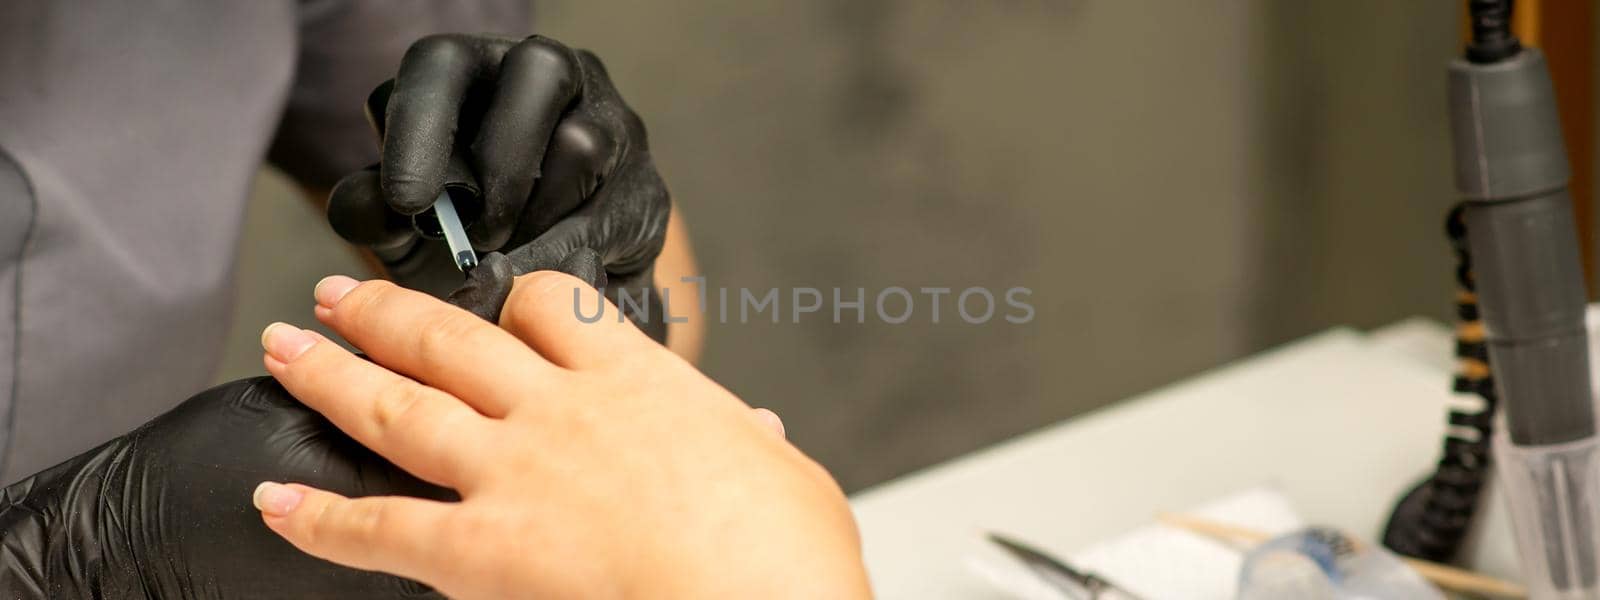 Manicure painting process. Manicure master paint the nails with transparent varnish in a nail salon, close up. by okskukuruza